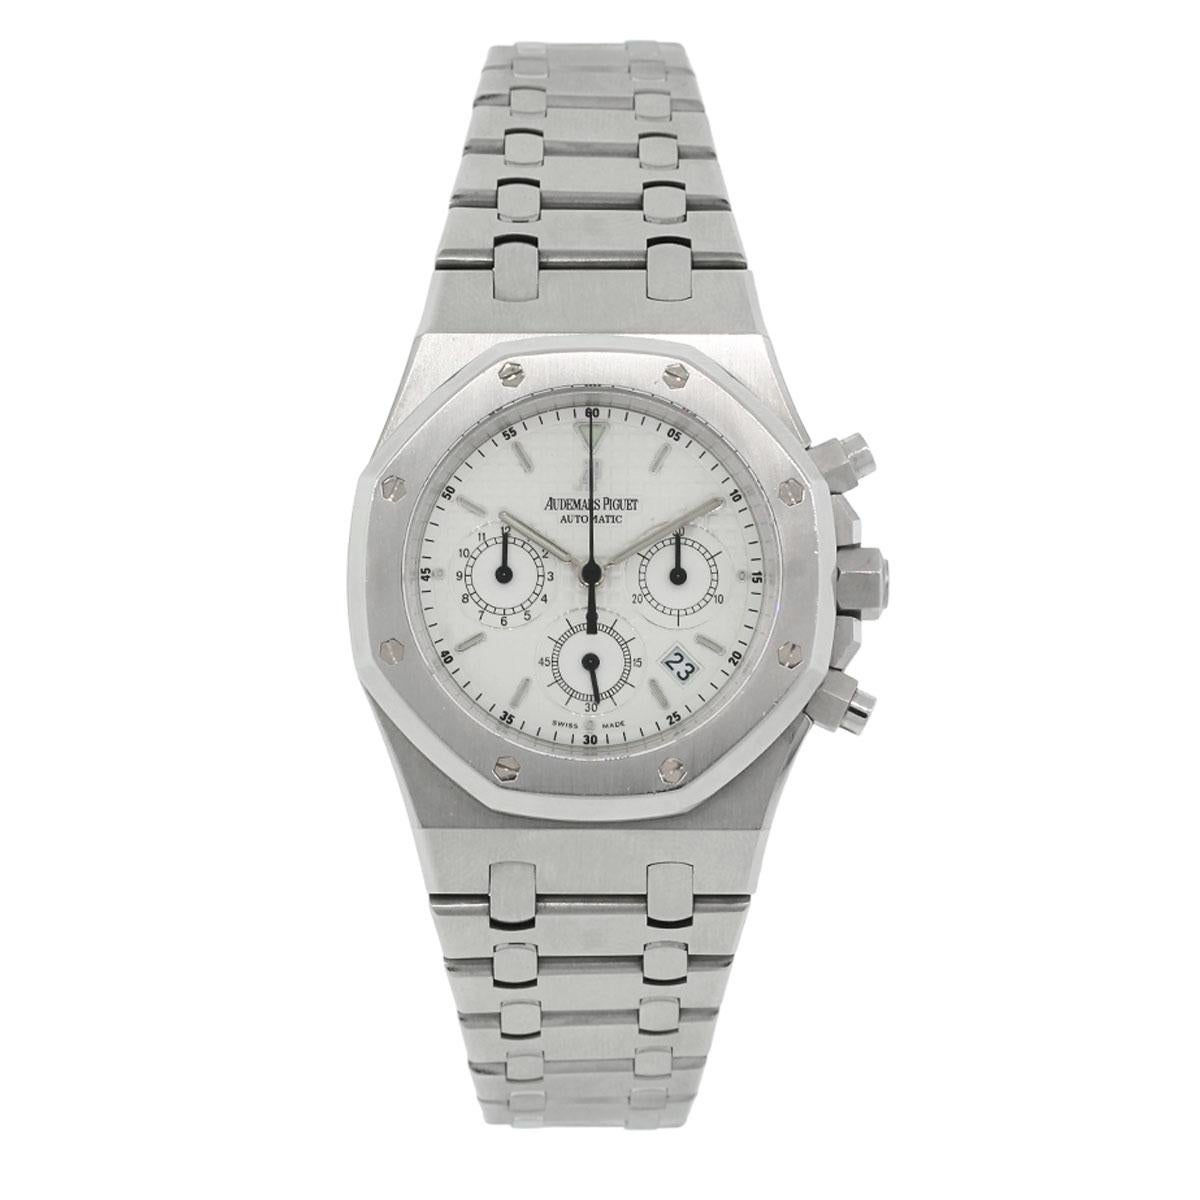 Brand: Audemars Piguet
MPN: 83013
Model: Royal Oak
Case Material: Stainless steel
Case Diameter: 39mm
Crystal: Sapphire
Bezel: Stainless steel
Dial: White “Grande Tapisserie” Chronograph dial with 3 sub dials
Bracelet: Stainless steel
Size: Will fit